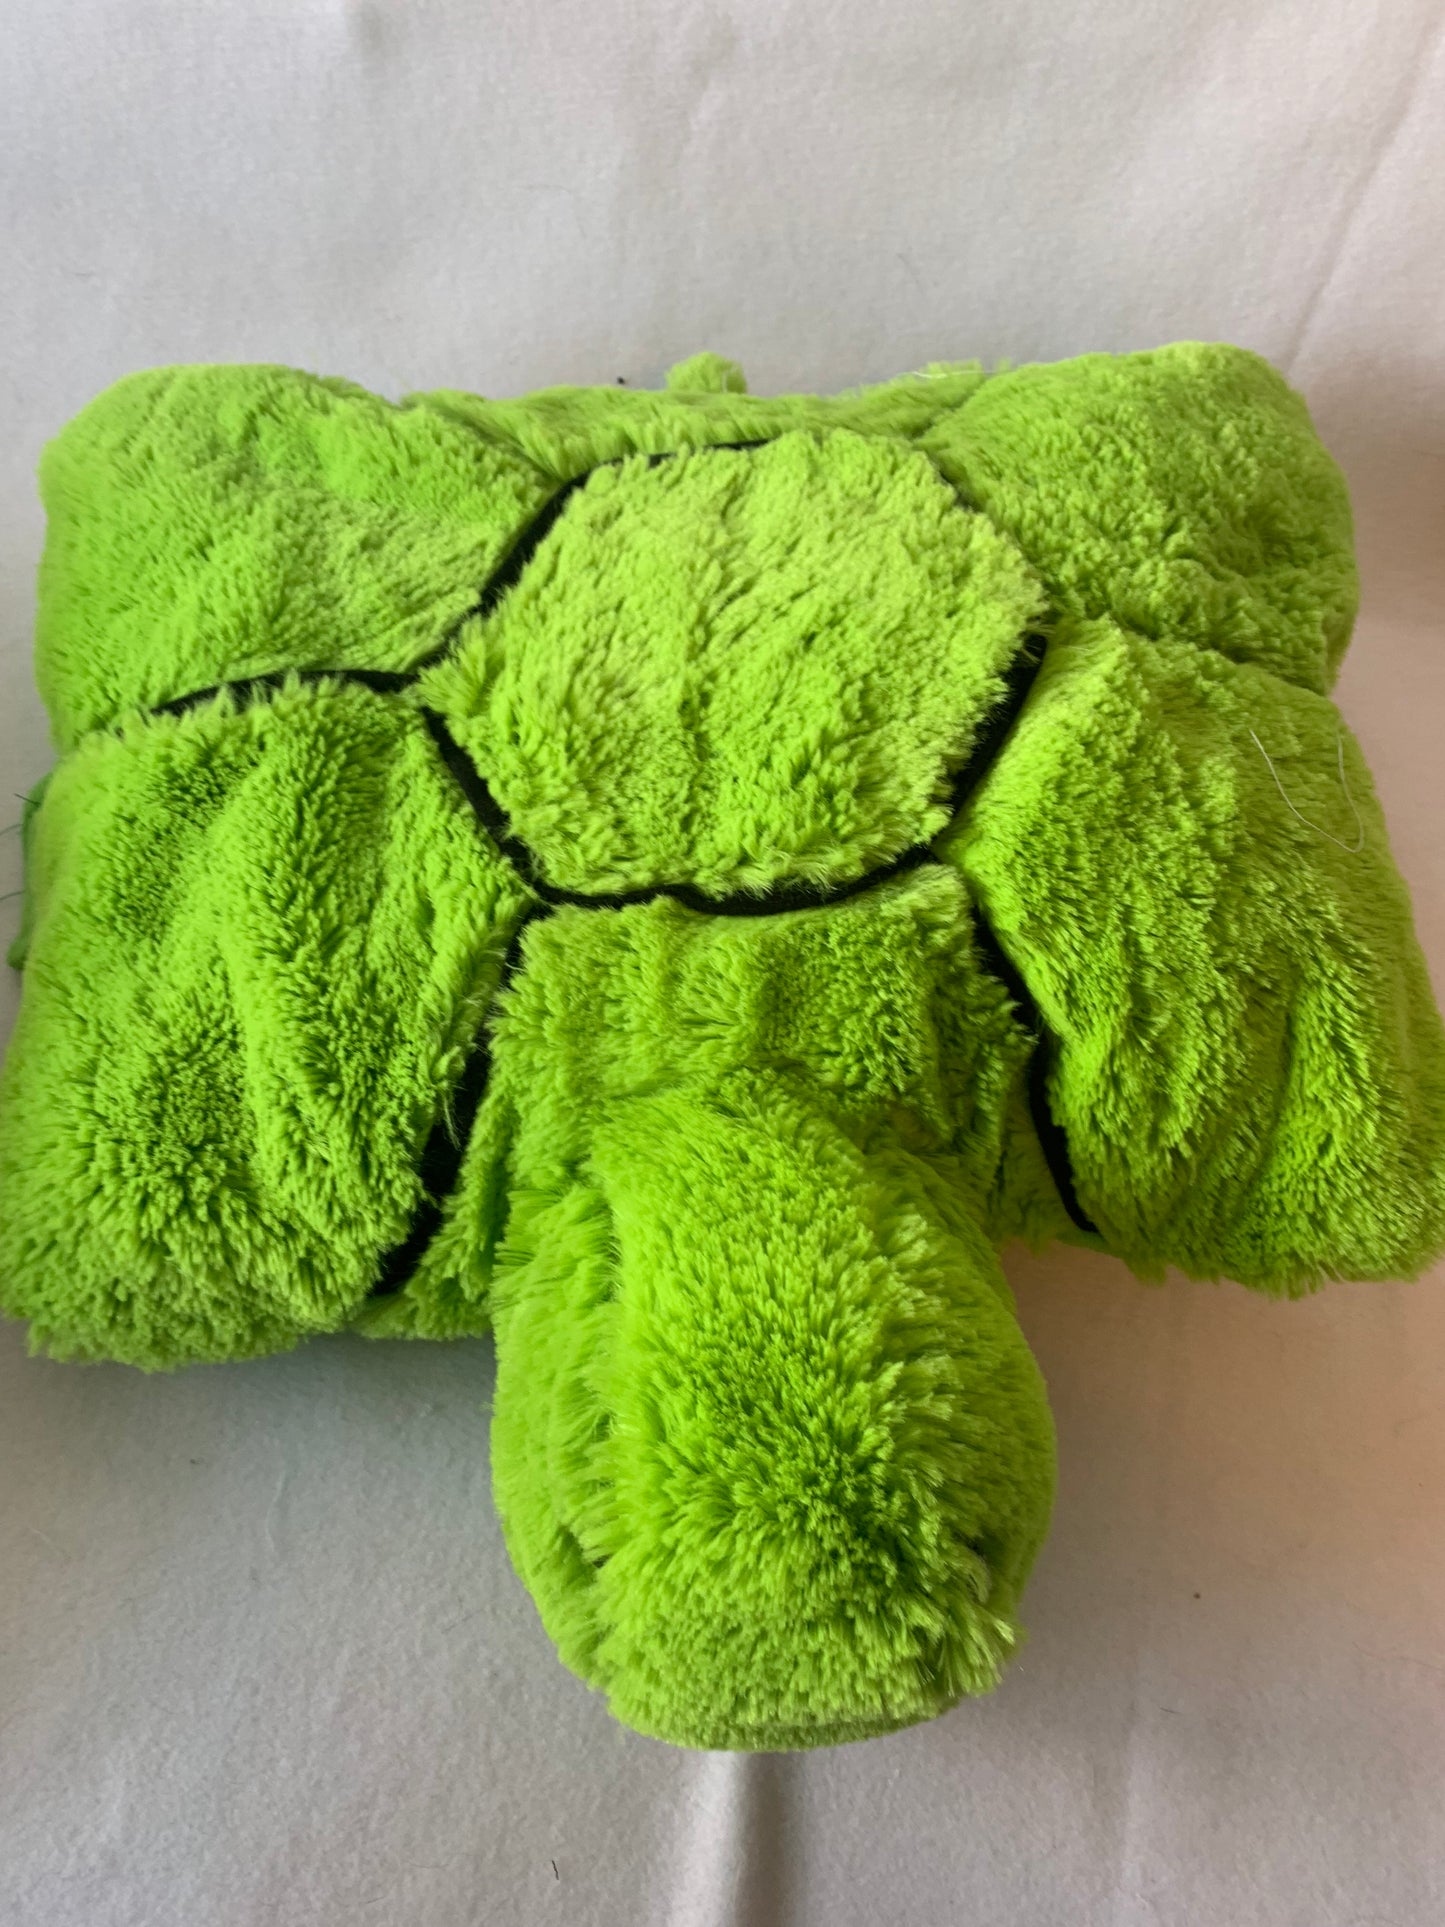 Weighted Lap Pad, Pillow Pet, small weighted buddy with 3 lbs, SENSORY LAP PAD, turtle, troll, dog or seal